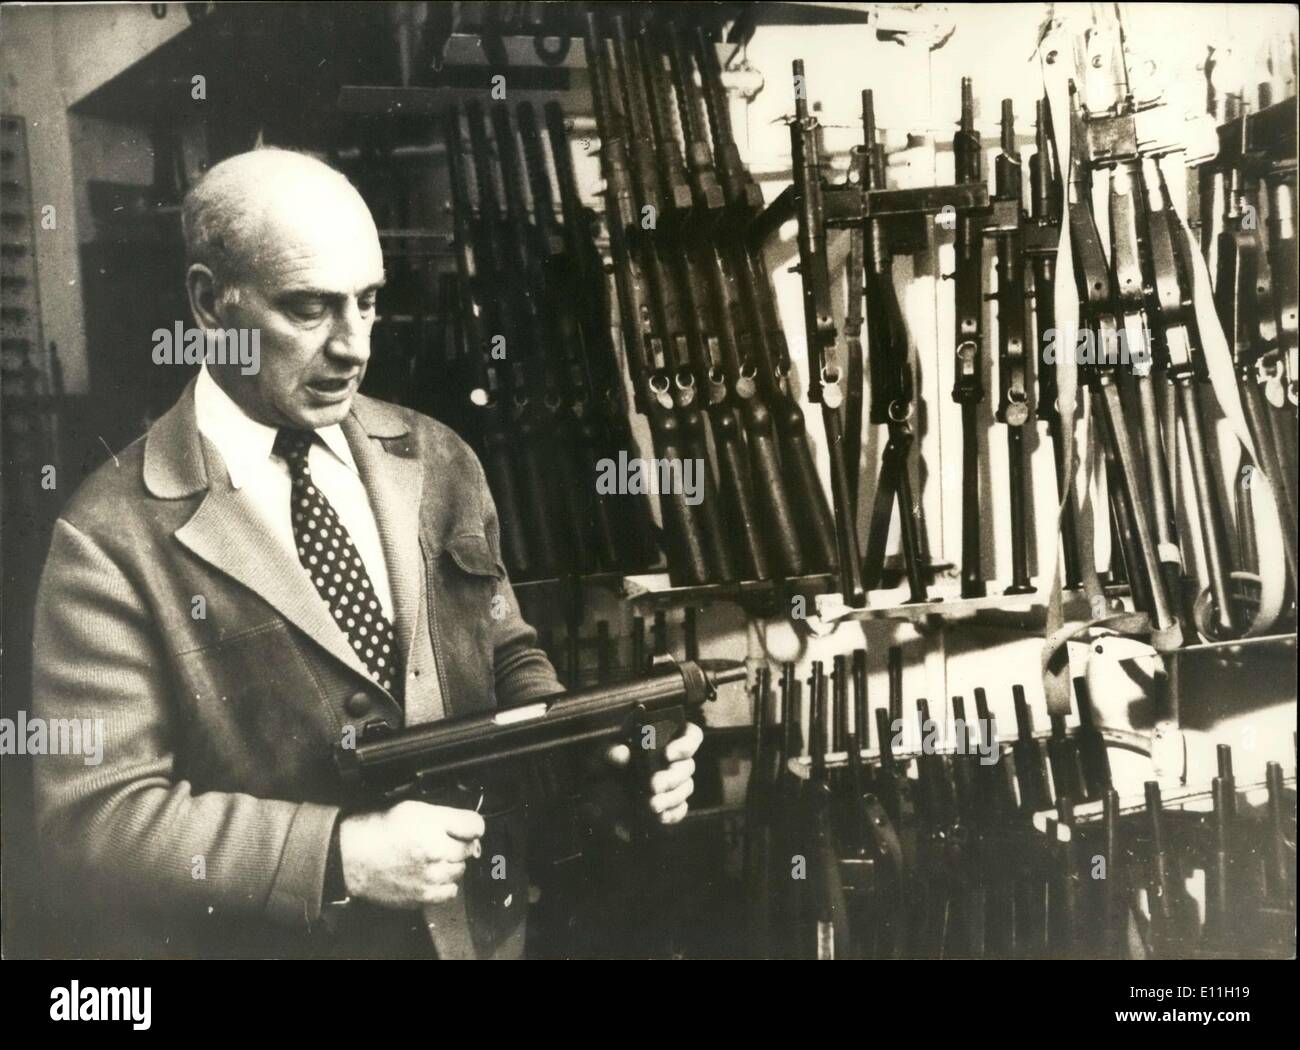 Dec. 22, 1977 - Stacchini, who has a museum-worthy collection of guns, rents his arms out to movie producers to be used in war movies, Westerns, and other police-related movies. Stock Photo